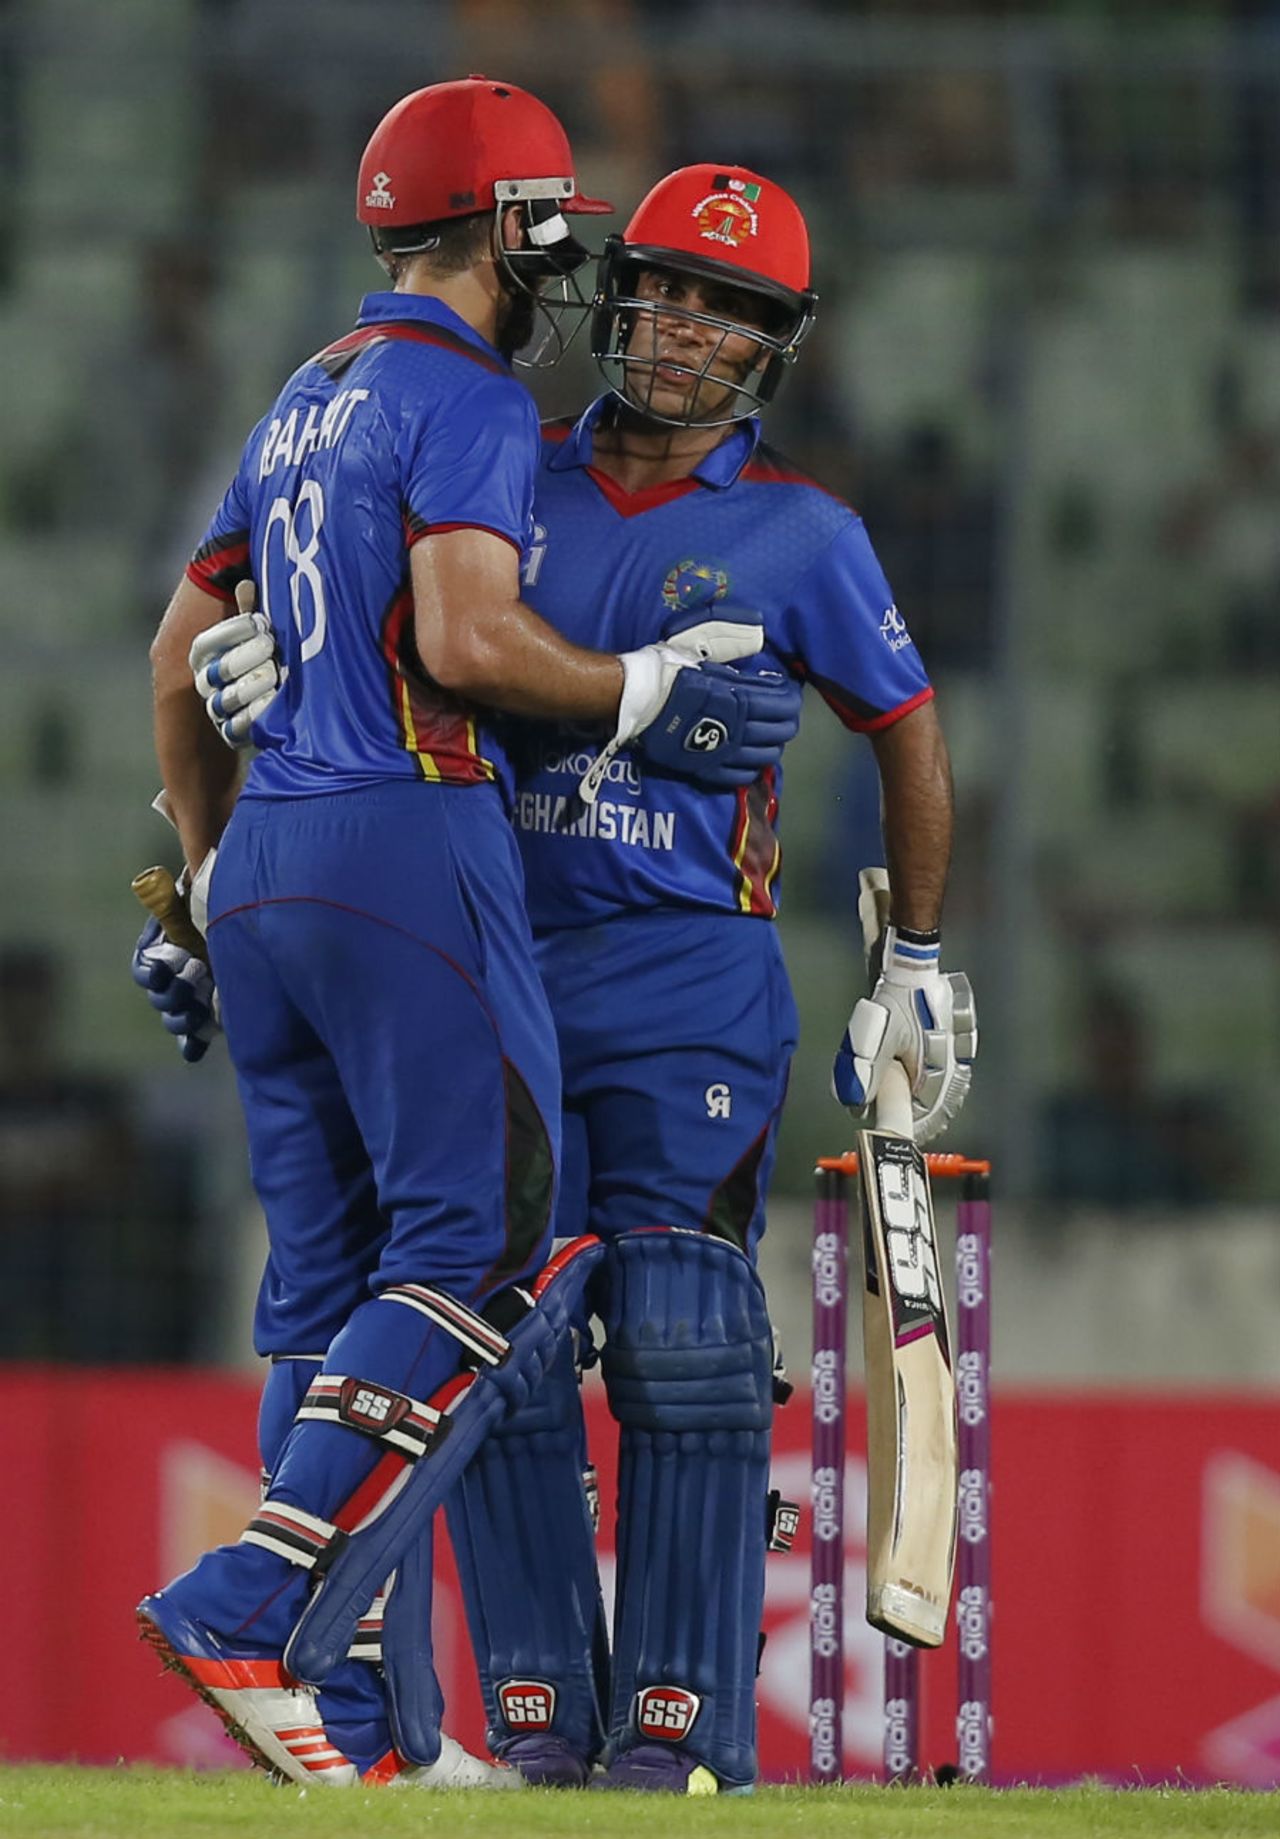 Rahmat Shah is congratulated by his team-mate Hashmatullah Shahidi after completing his half-century, Bangladesh v Afghanistan, 1st ODI, September 25, 2016